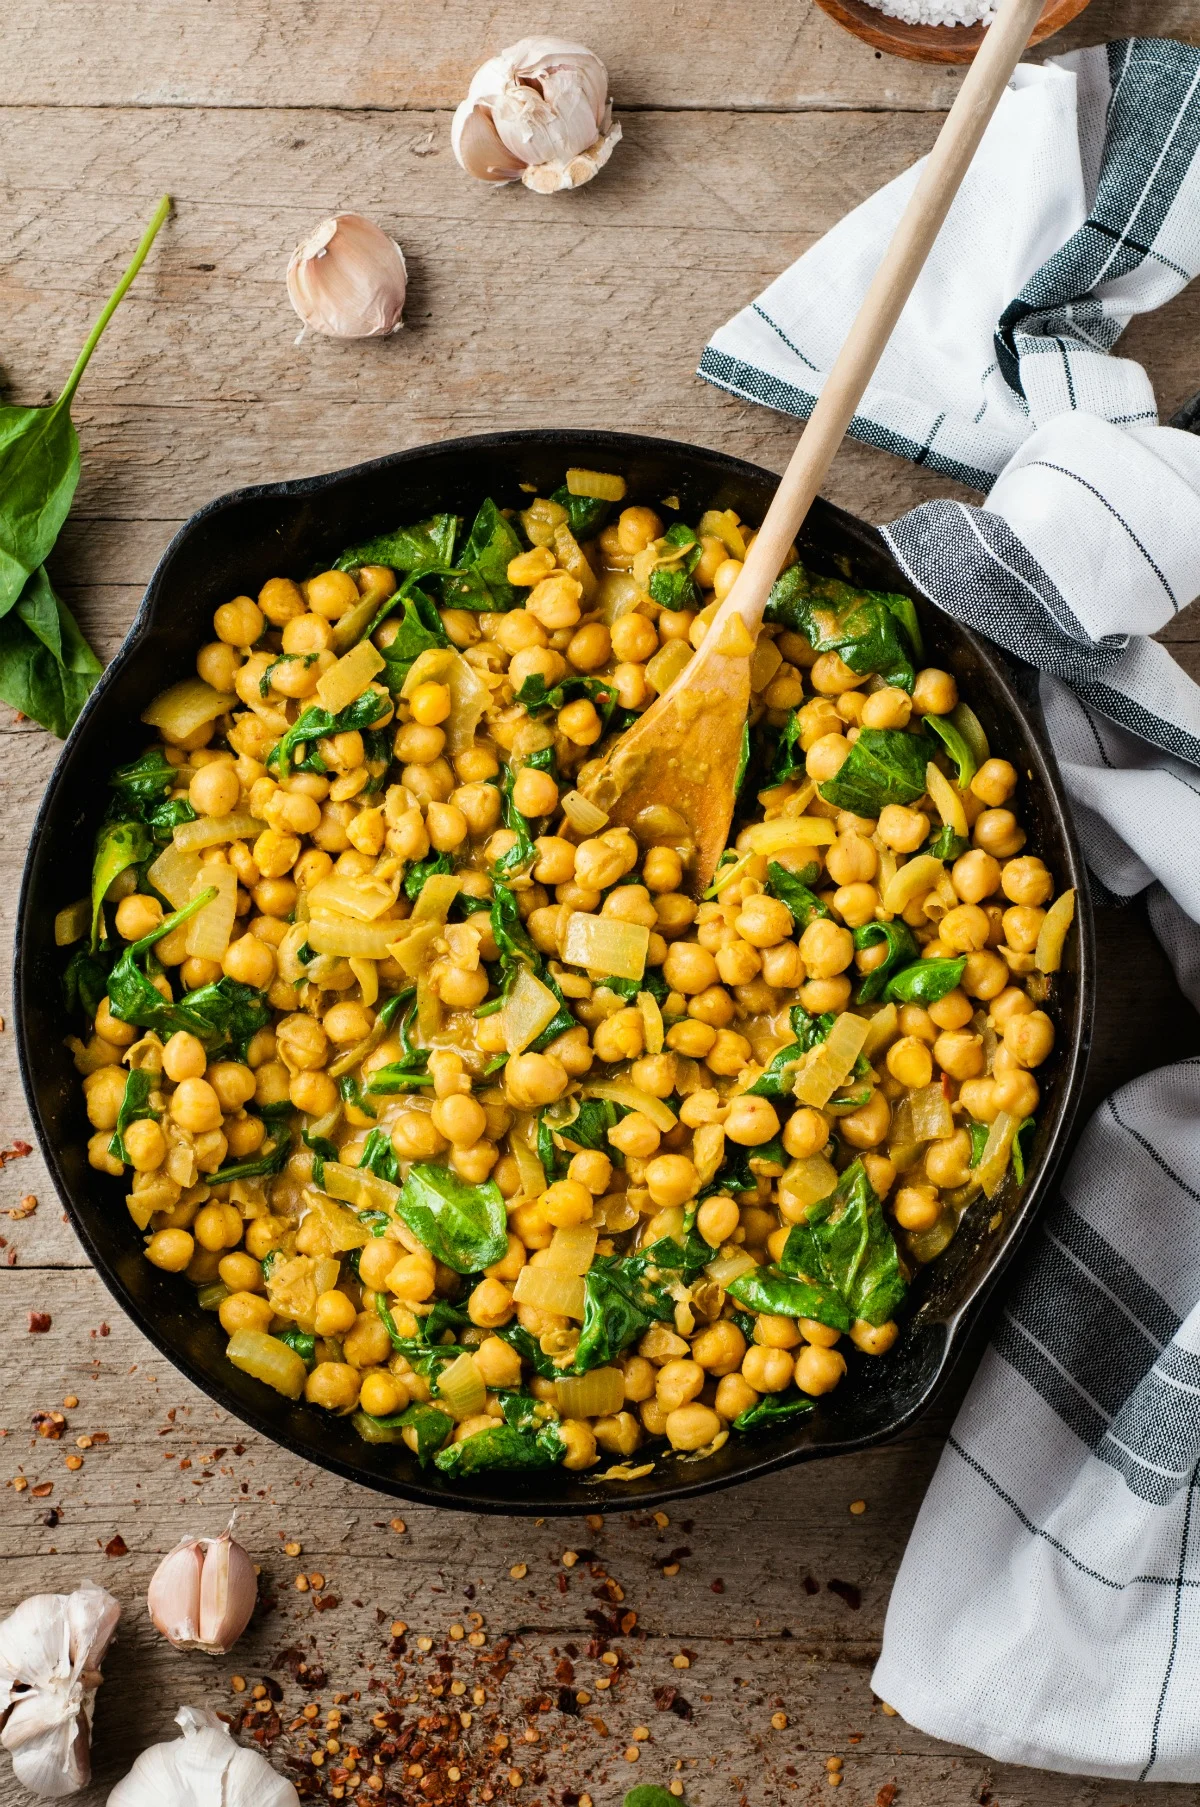 Fragrant and creamy Chickpea Curry is a vegetarian meal that comes together in under 30 minutes! Made with coconut milk and curry spices, this may become your new favorite weeknight meal.